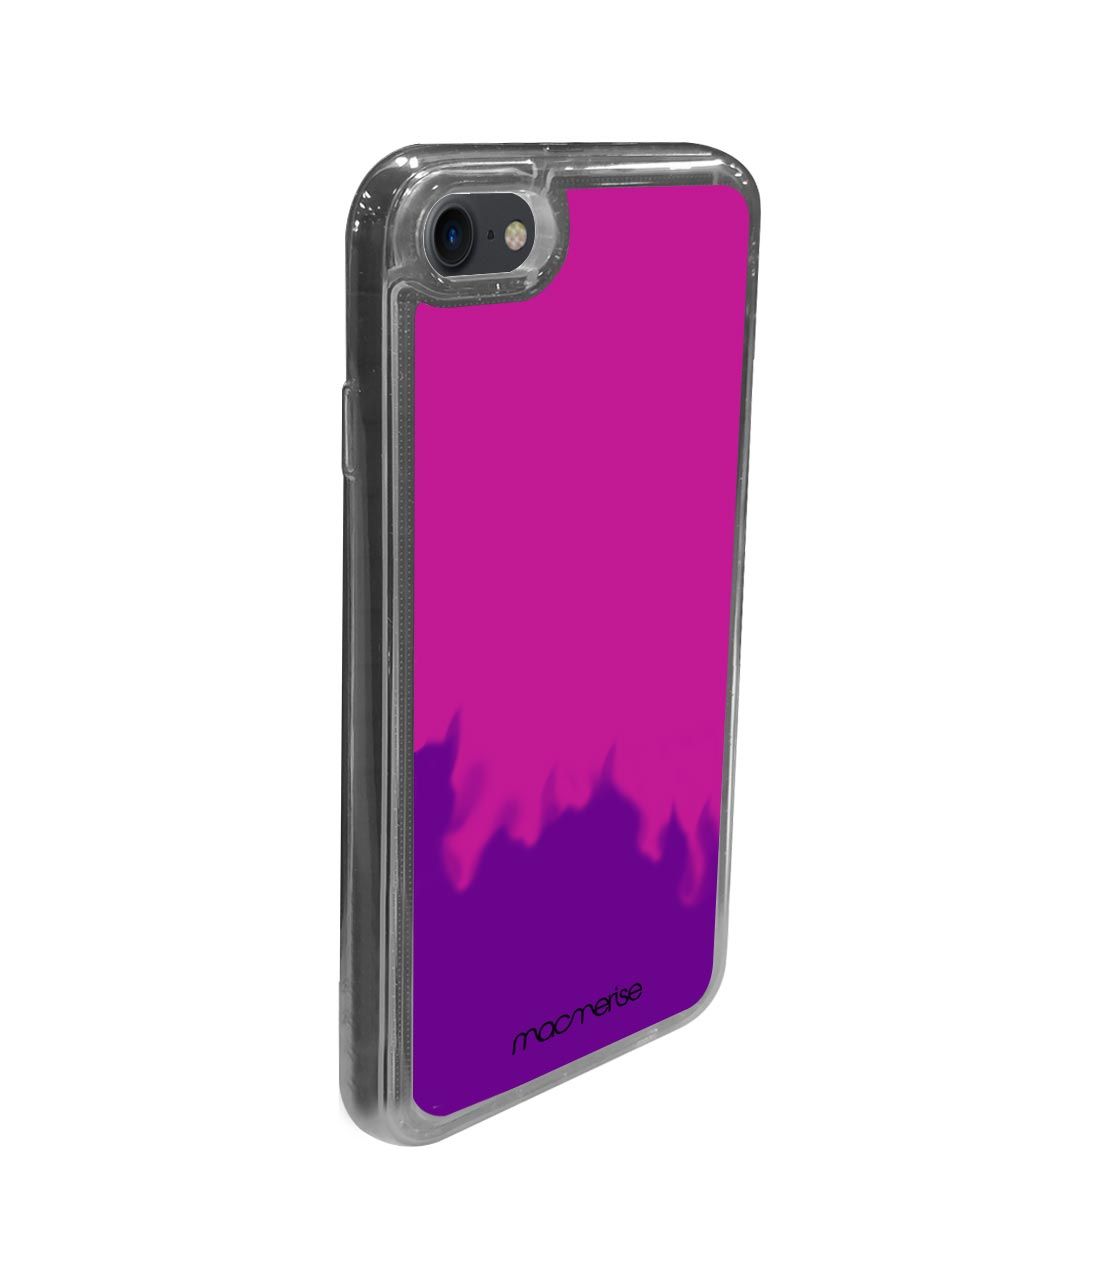 Neon Sand Purple Pink - Neon Sand Phone Case for iPhone 7